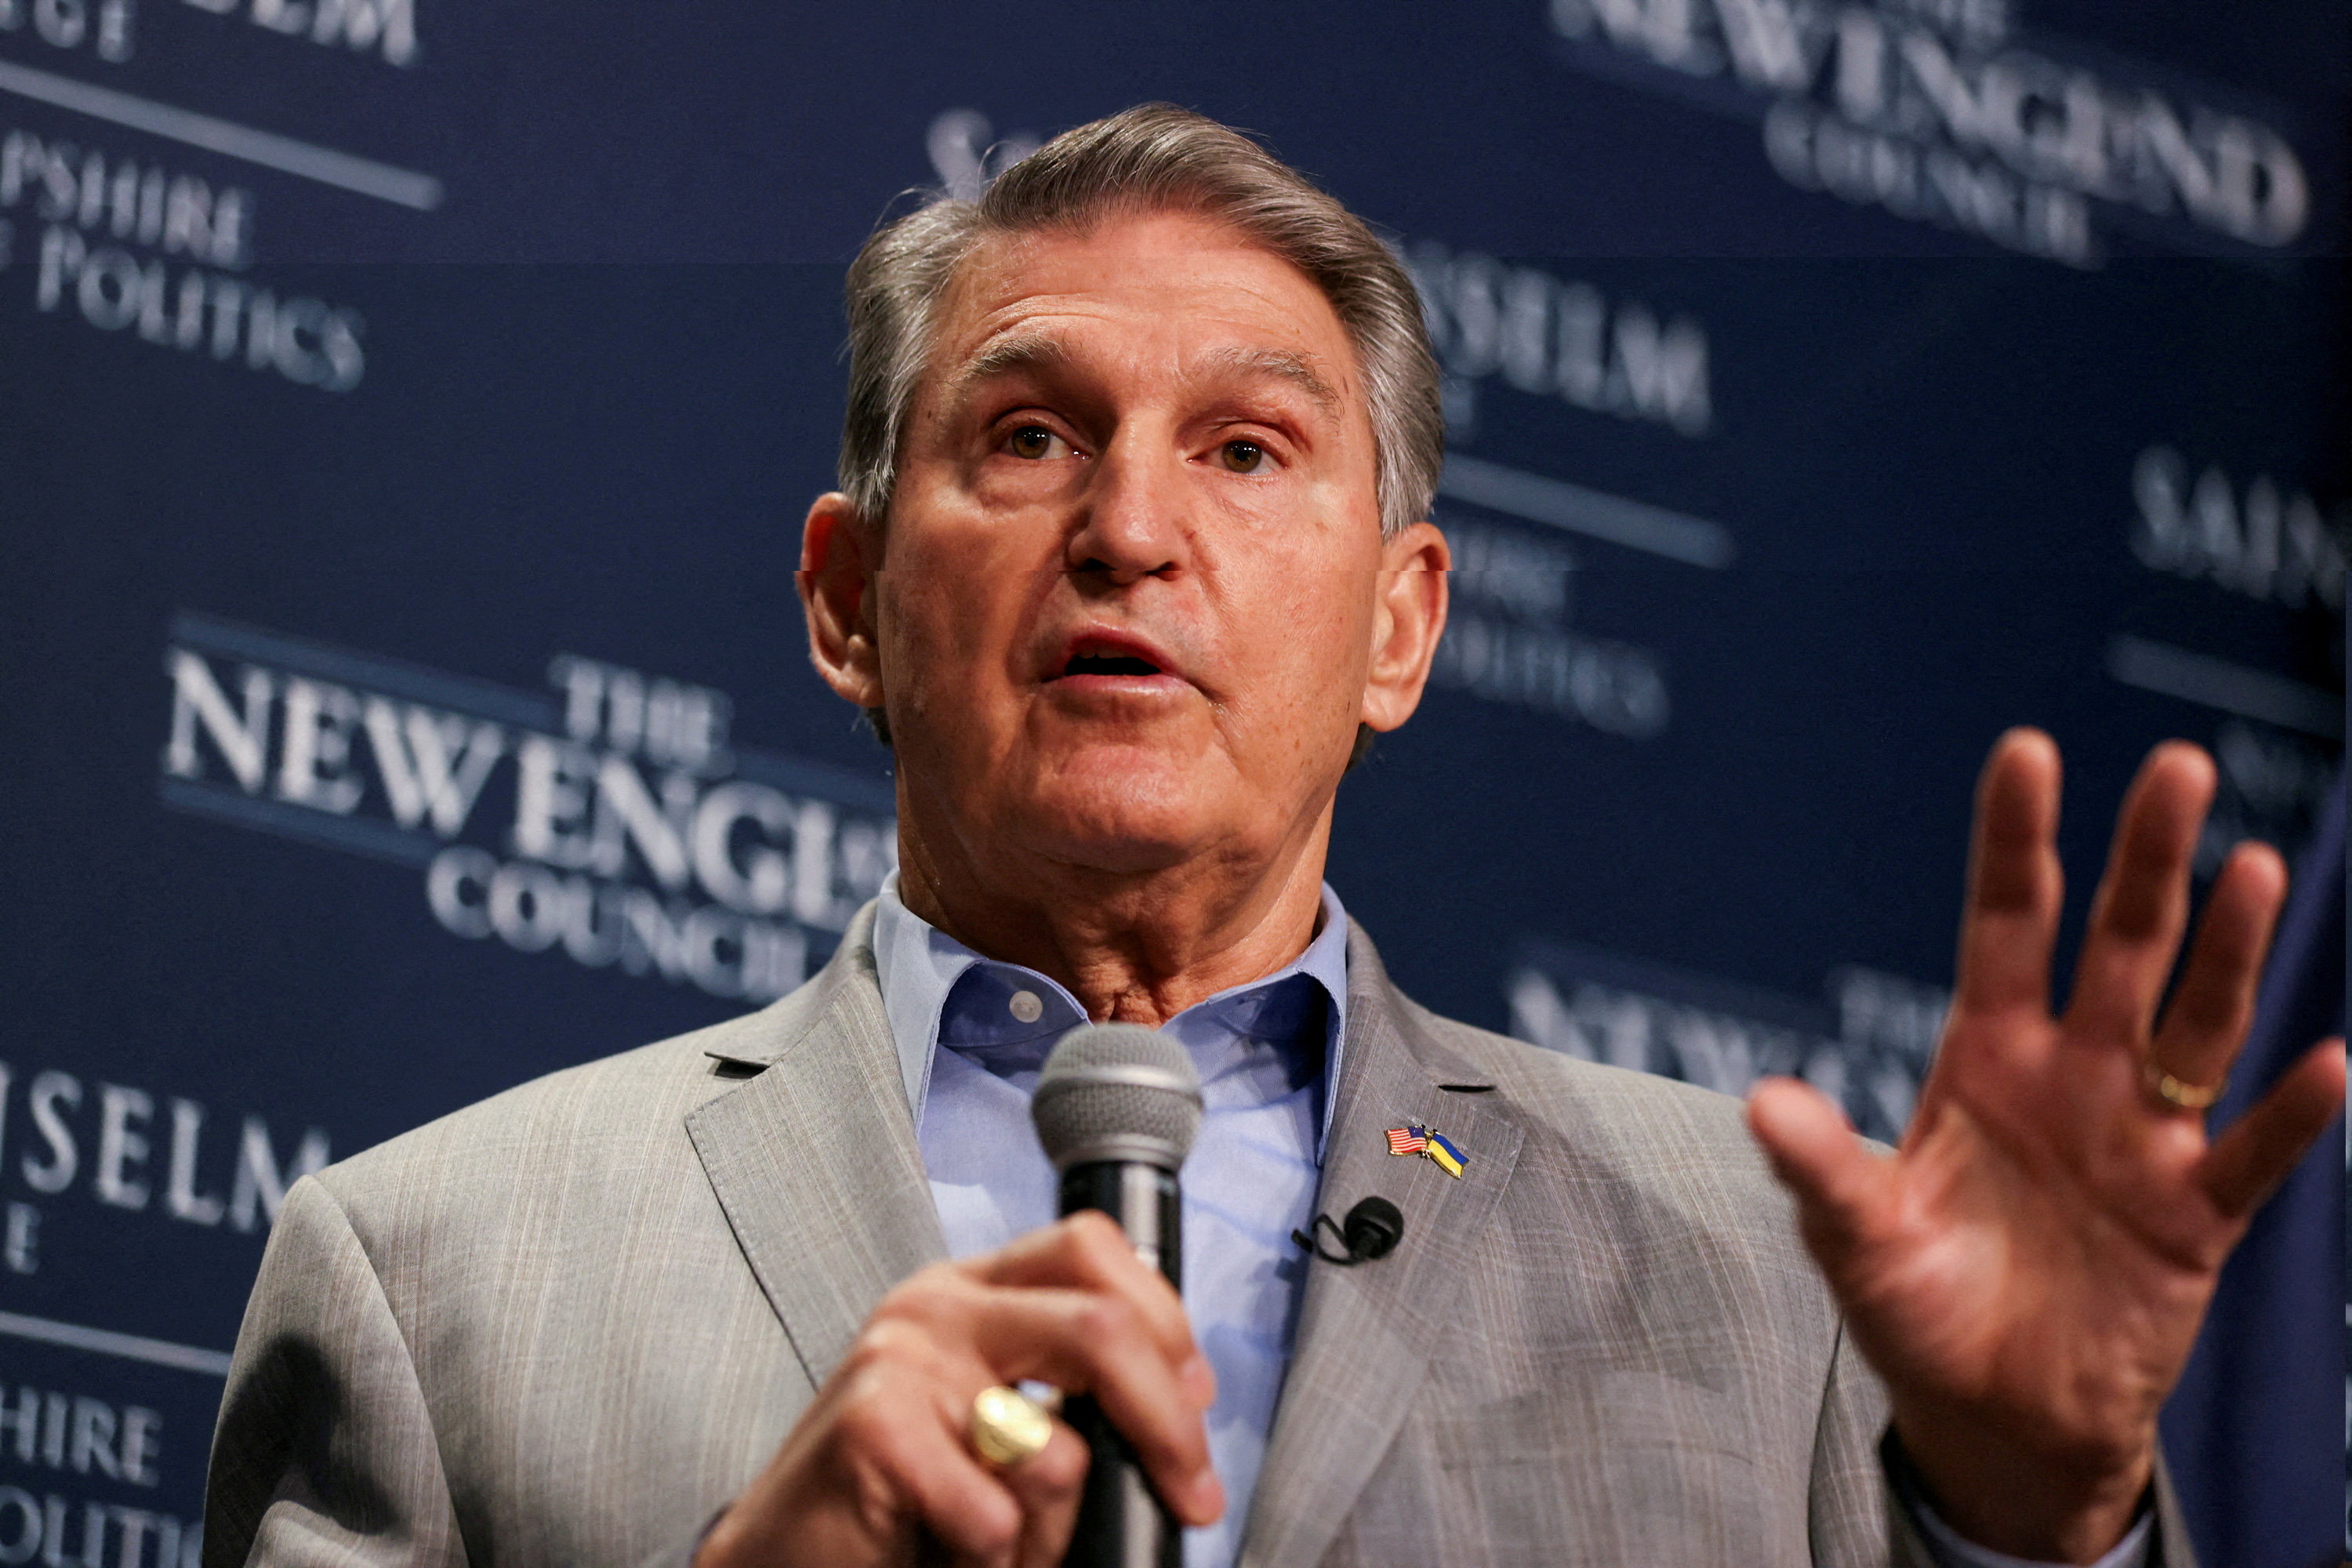 US Senator Joe Manchin speaks at The New Hampshire Institute of Politics at Saint Anselm College in Manchester, New Hampshire, in January. Photo: Reuters